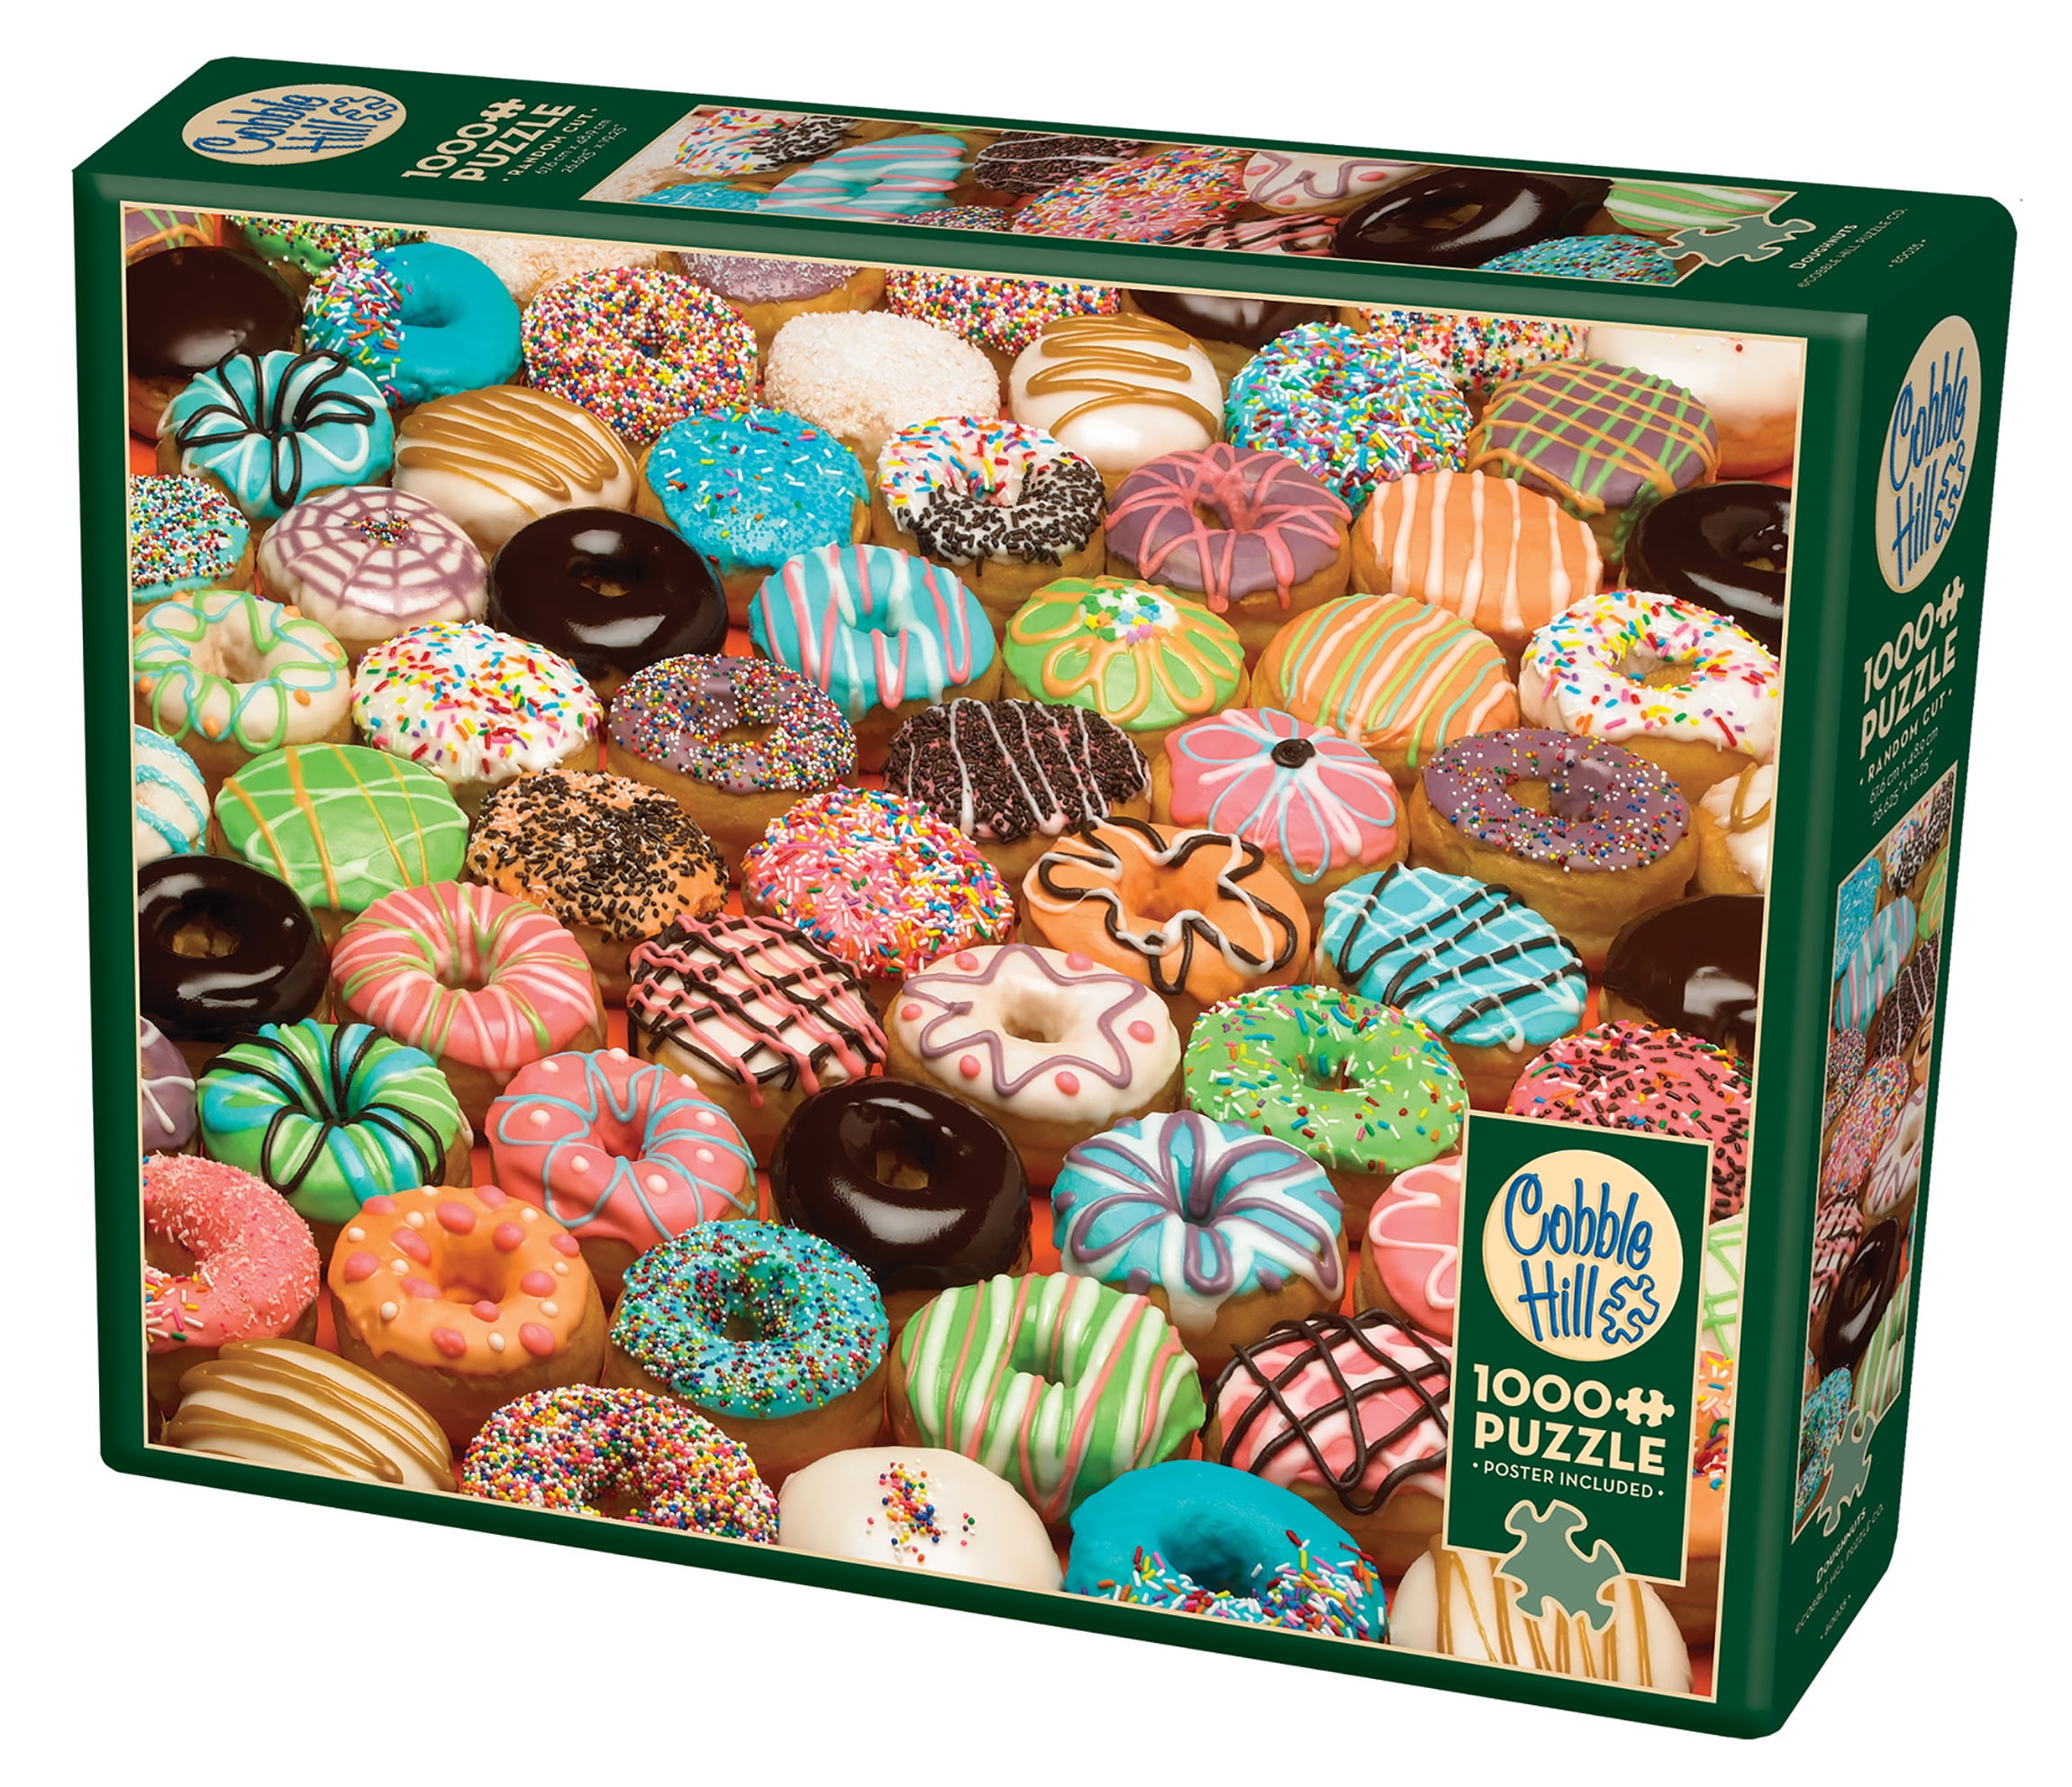 Colorful Sprinkle Gourmet Donuts Fancy Puzzle 100 Pieces 8.75"X11.25" Piece NEW